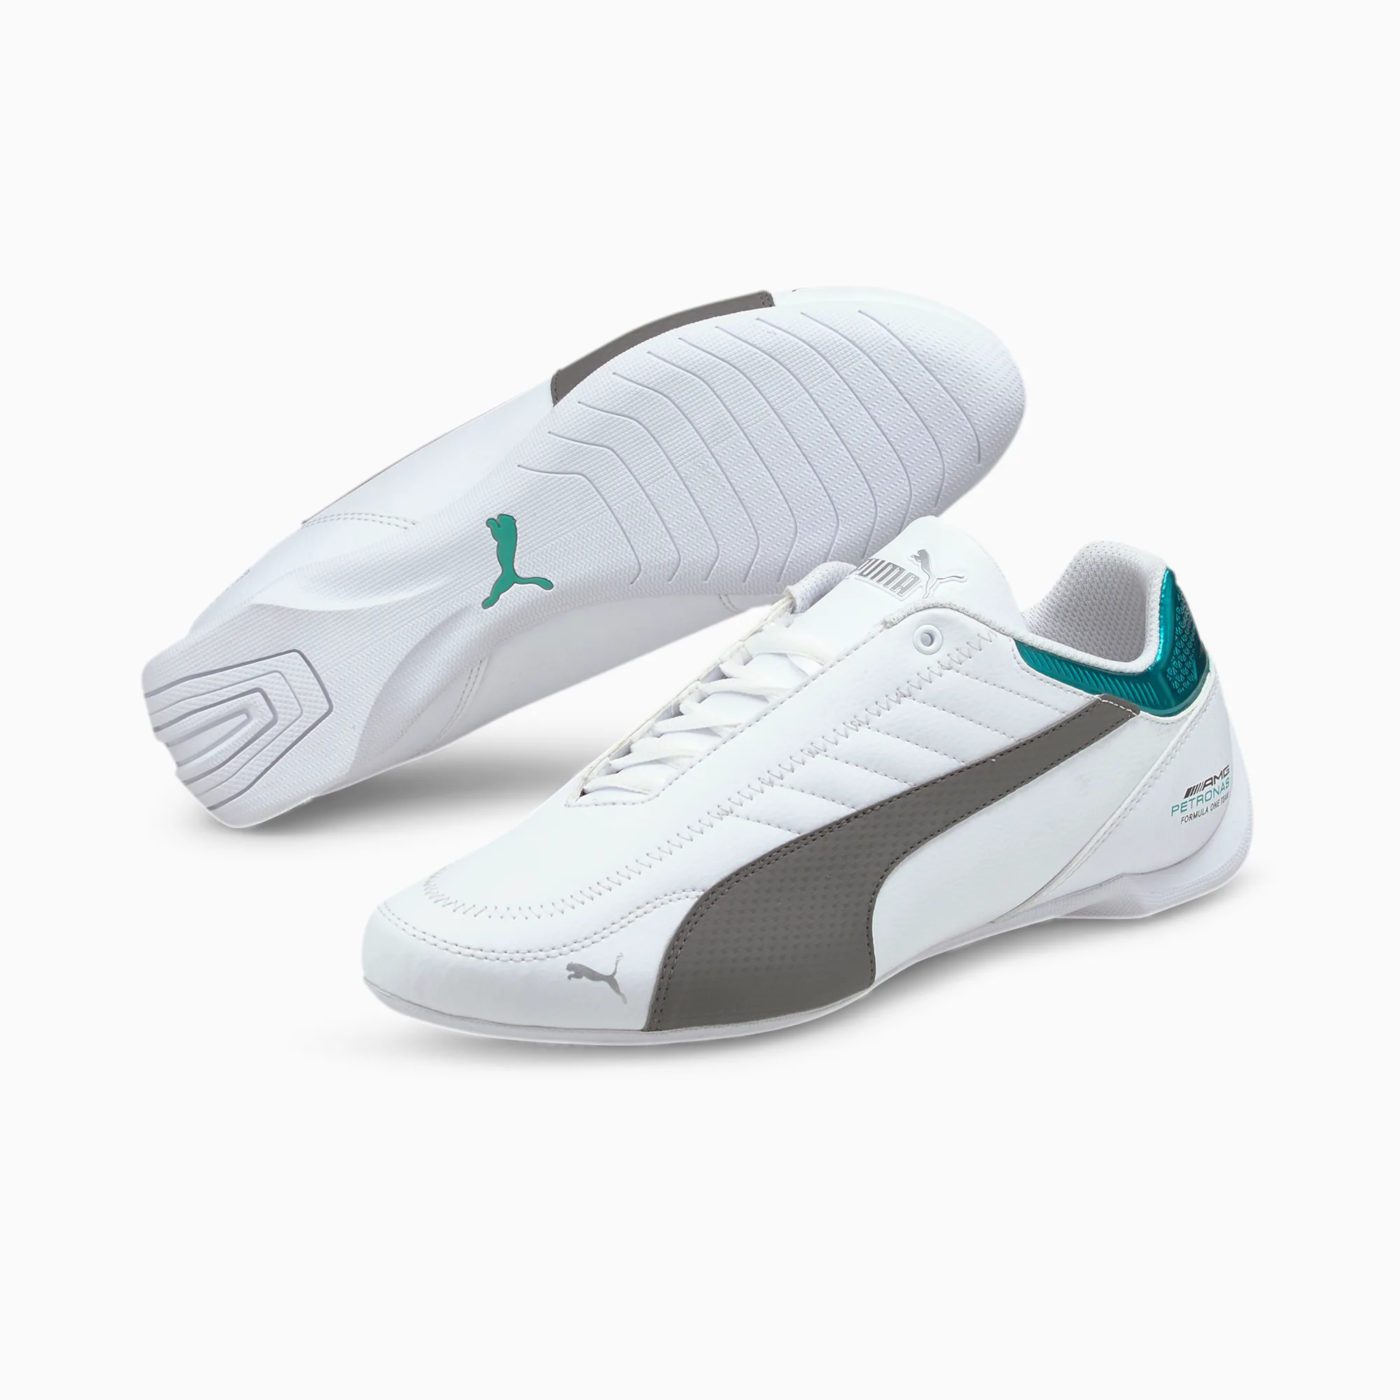 The New Puma x Mercedes-AMG Petronas Future Kart Kat Sneakers Now Available